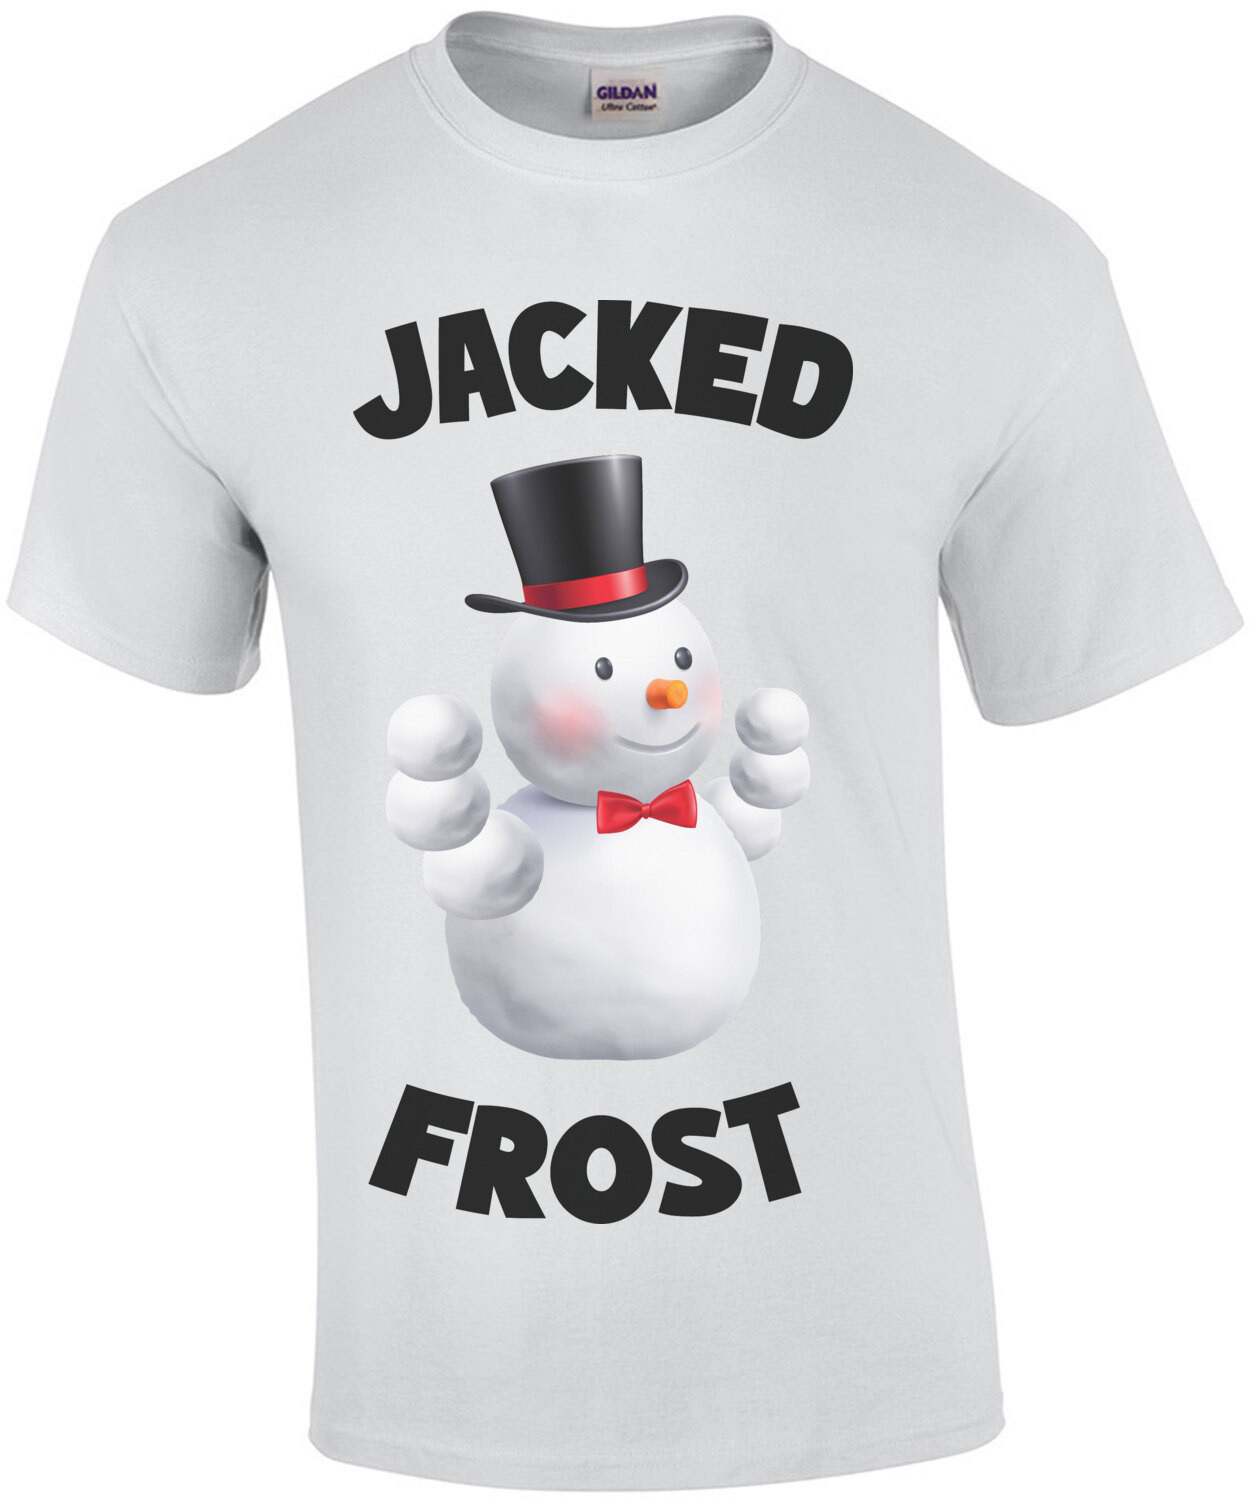 Jacked Frost - Funny Christmas T-Shirt